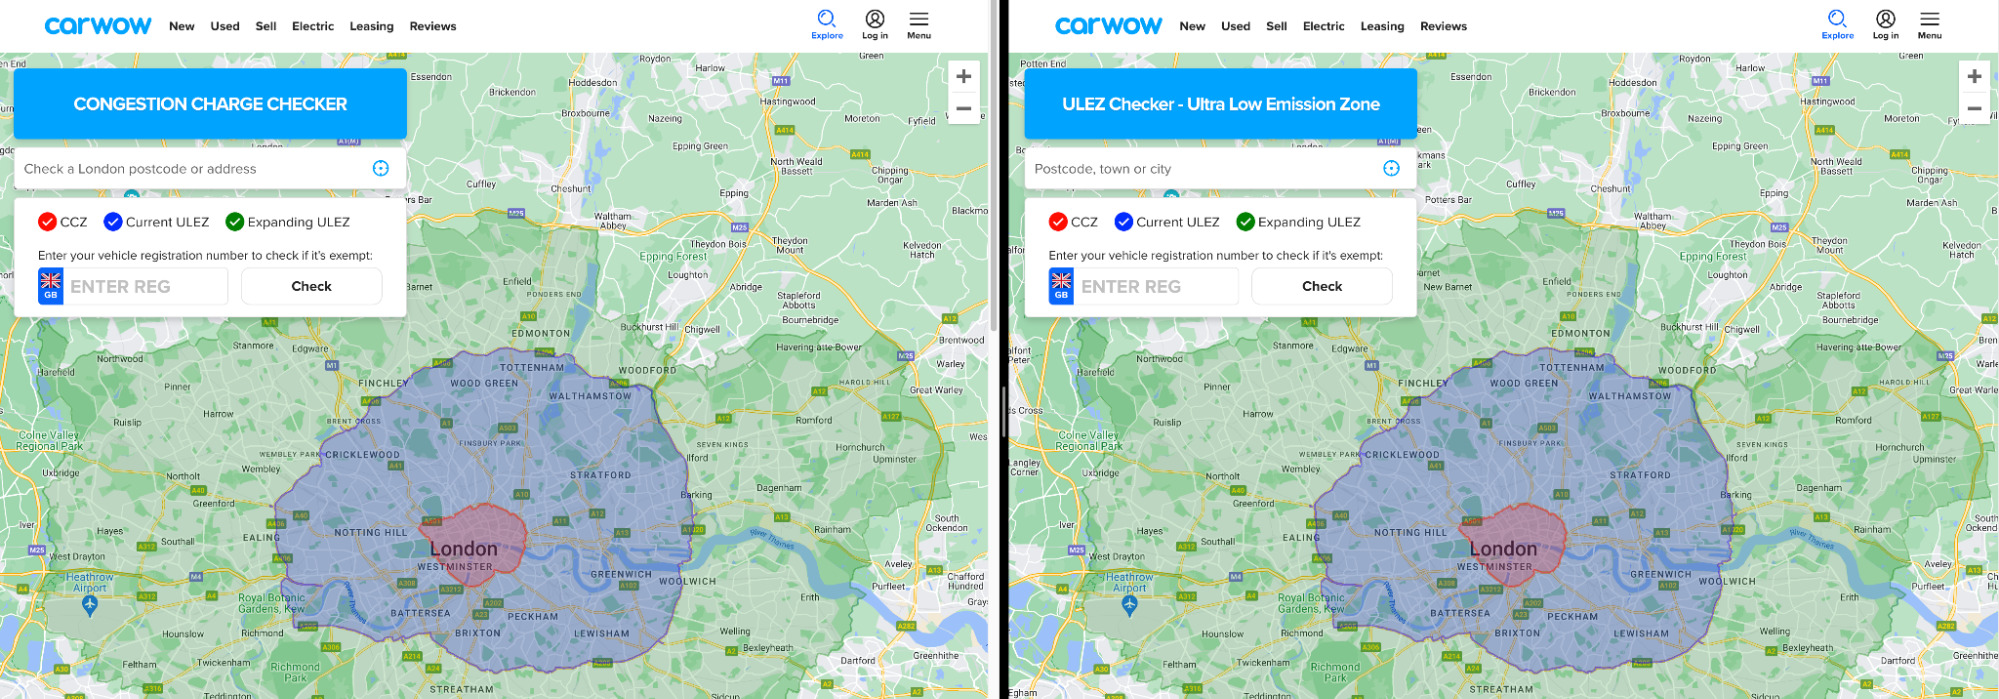 Congestion charge checker and ULEZ are practically identical